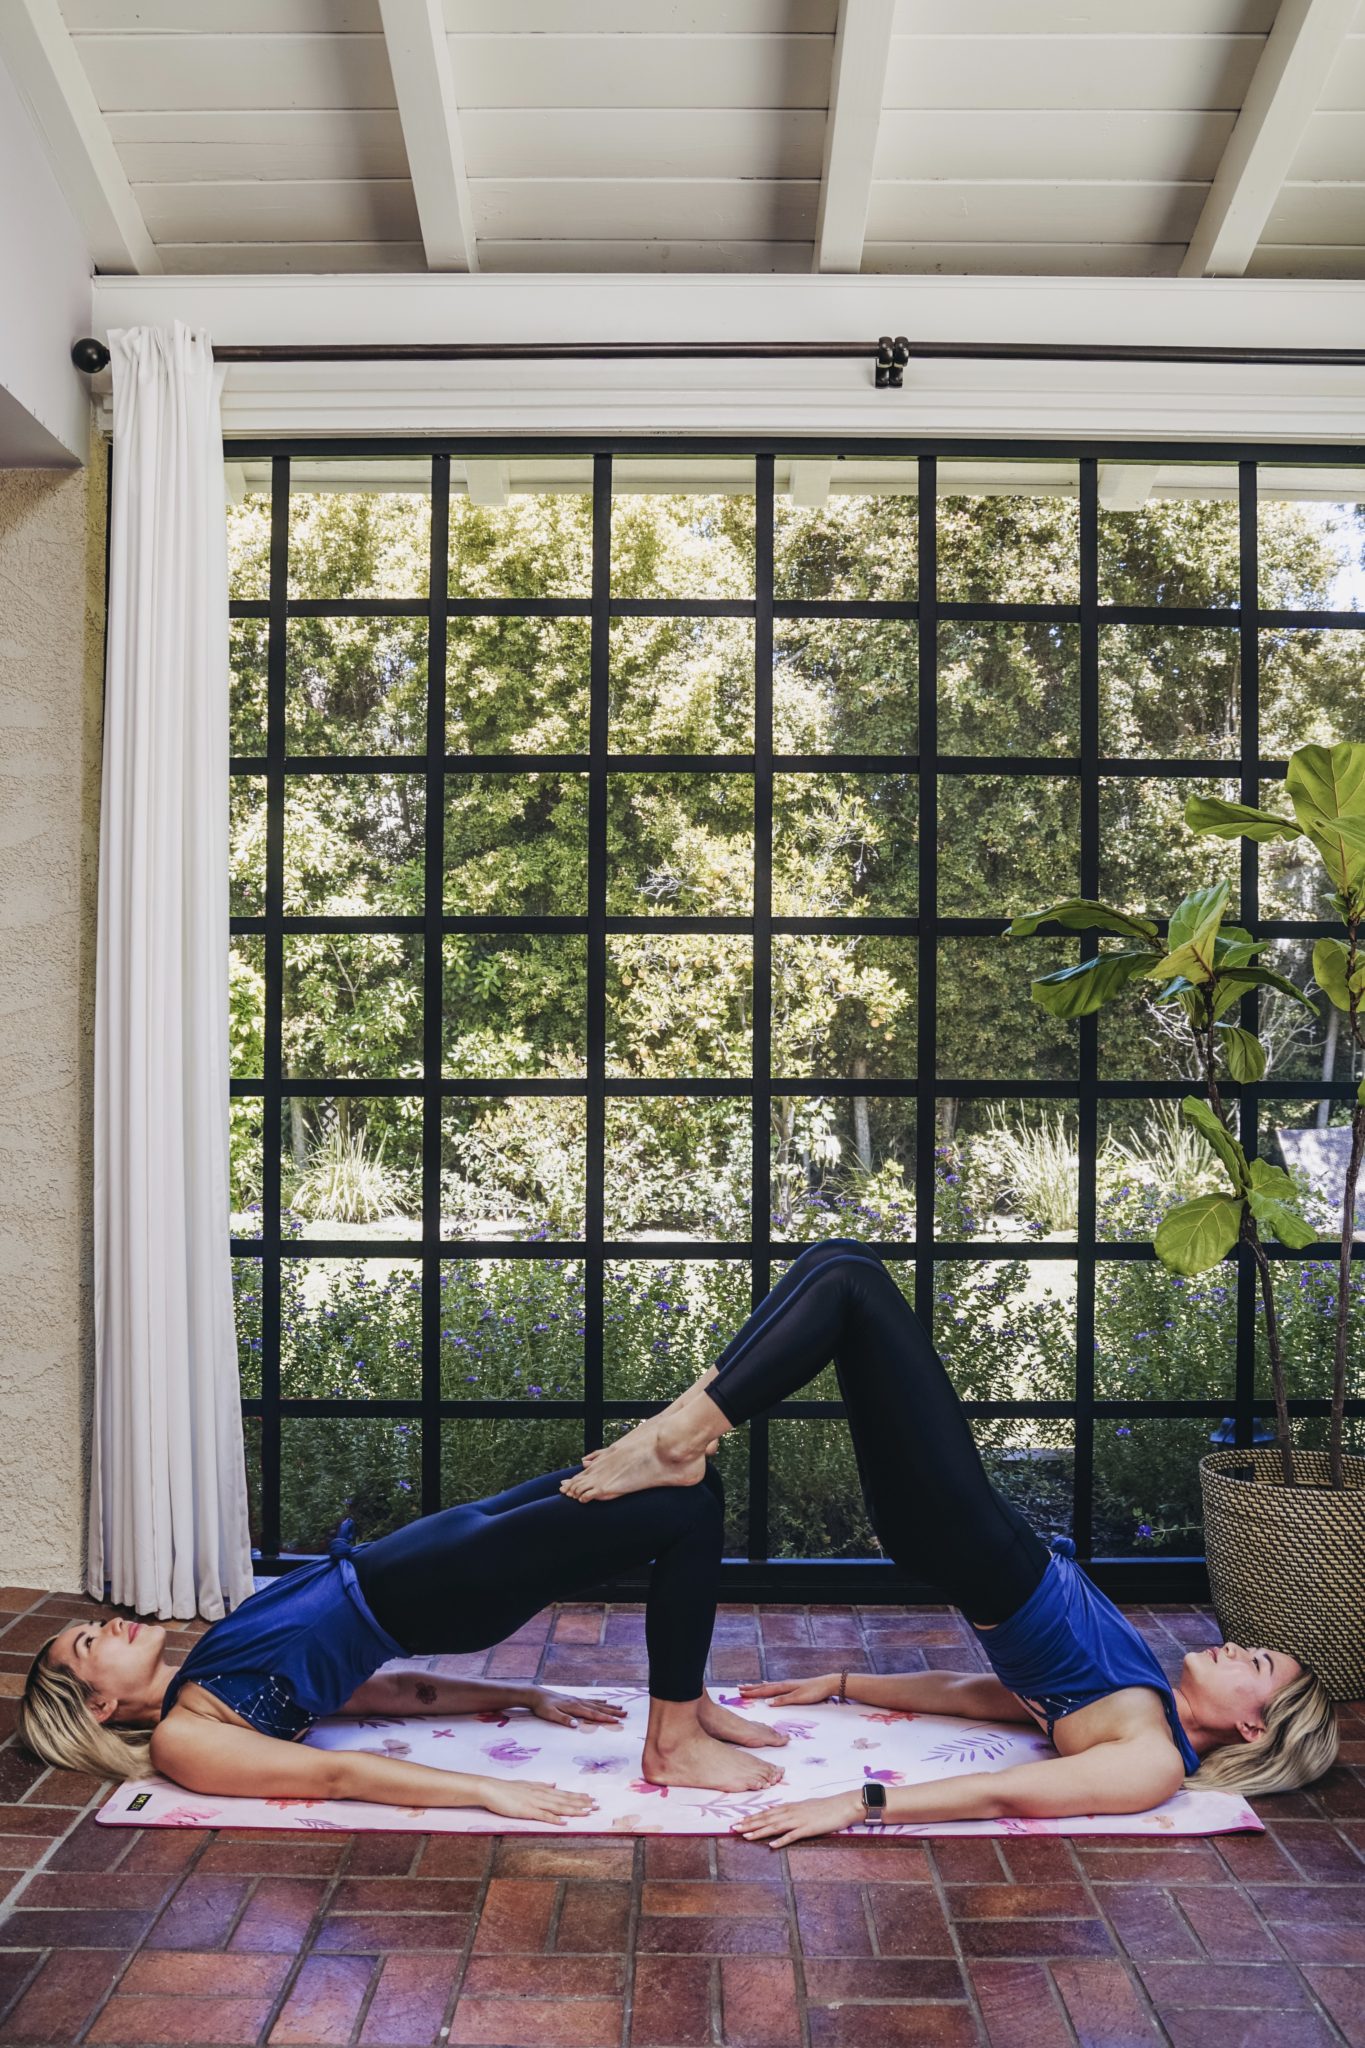 The 12 Best Yoga Poses for Two People (2021 Guide)